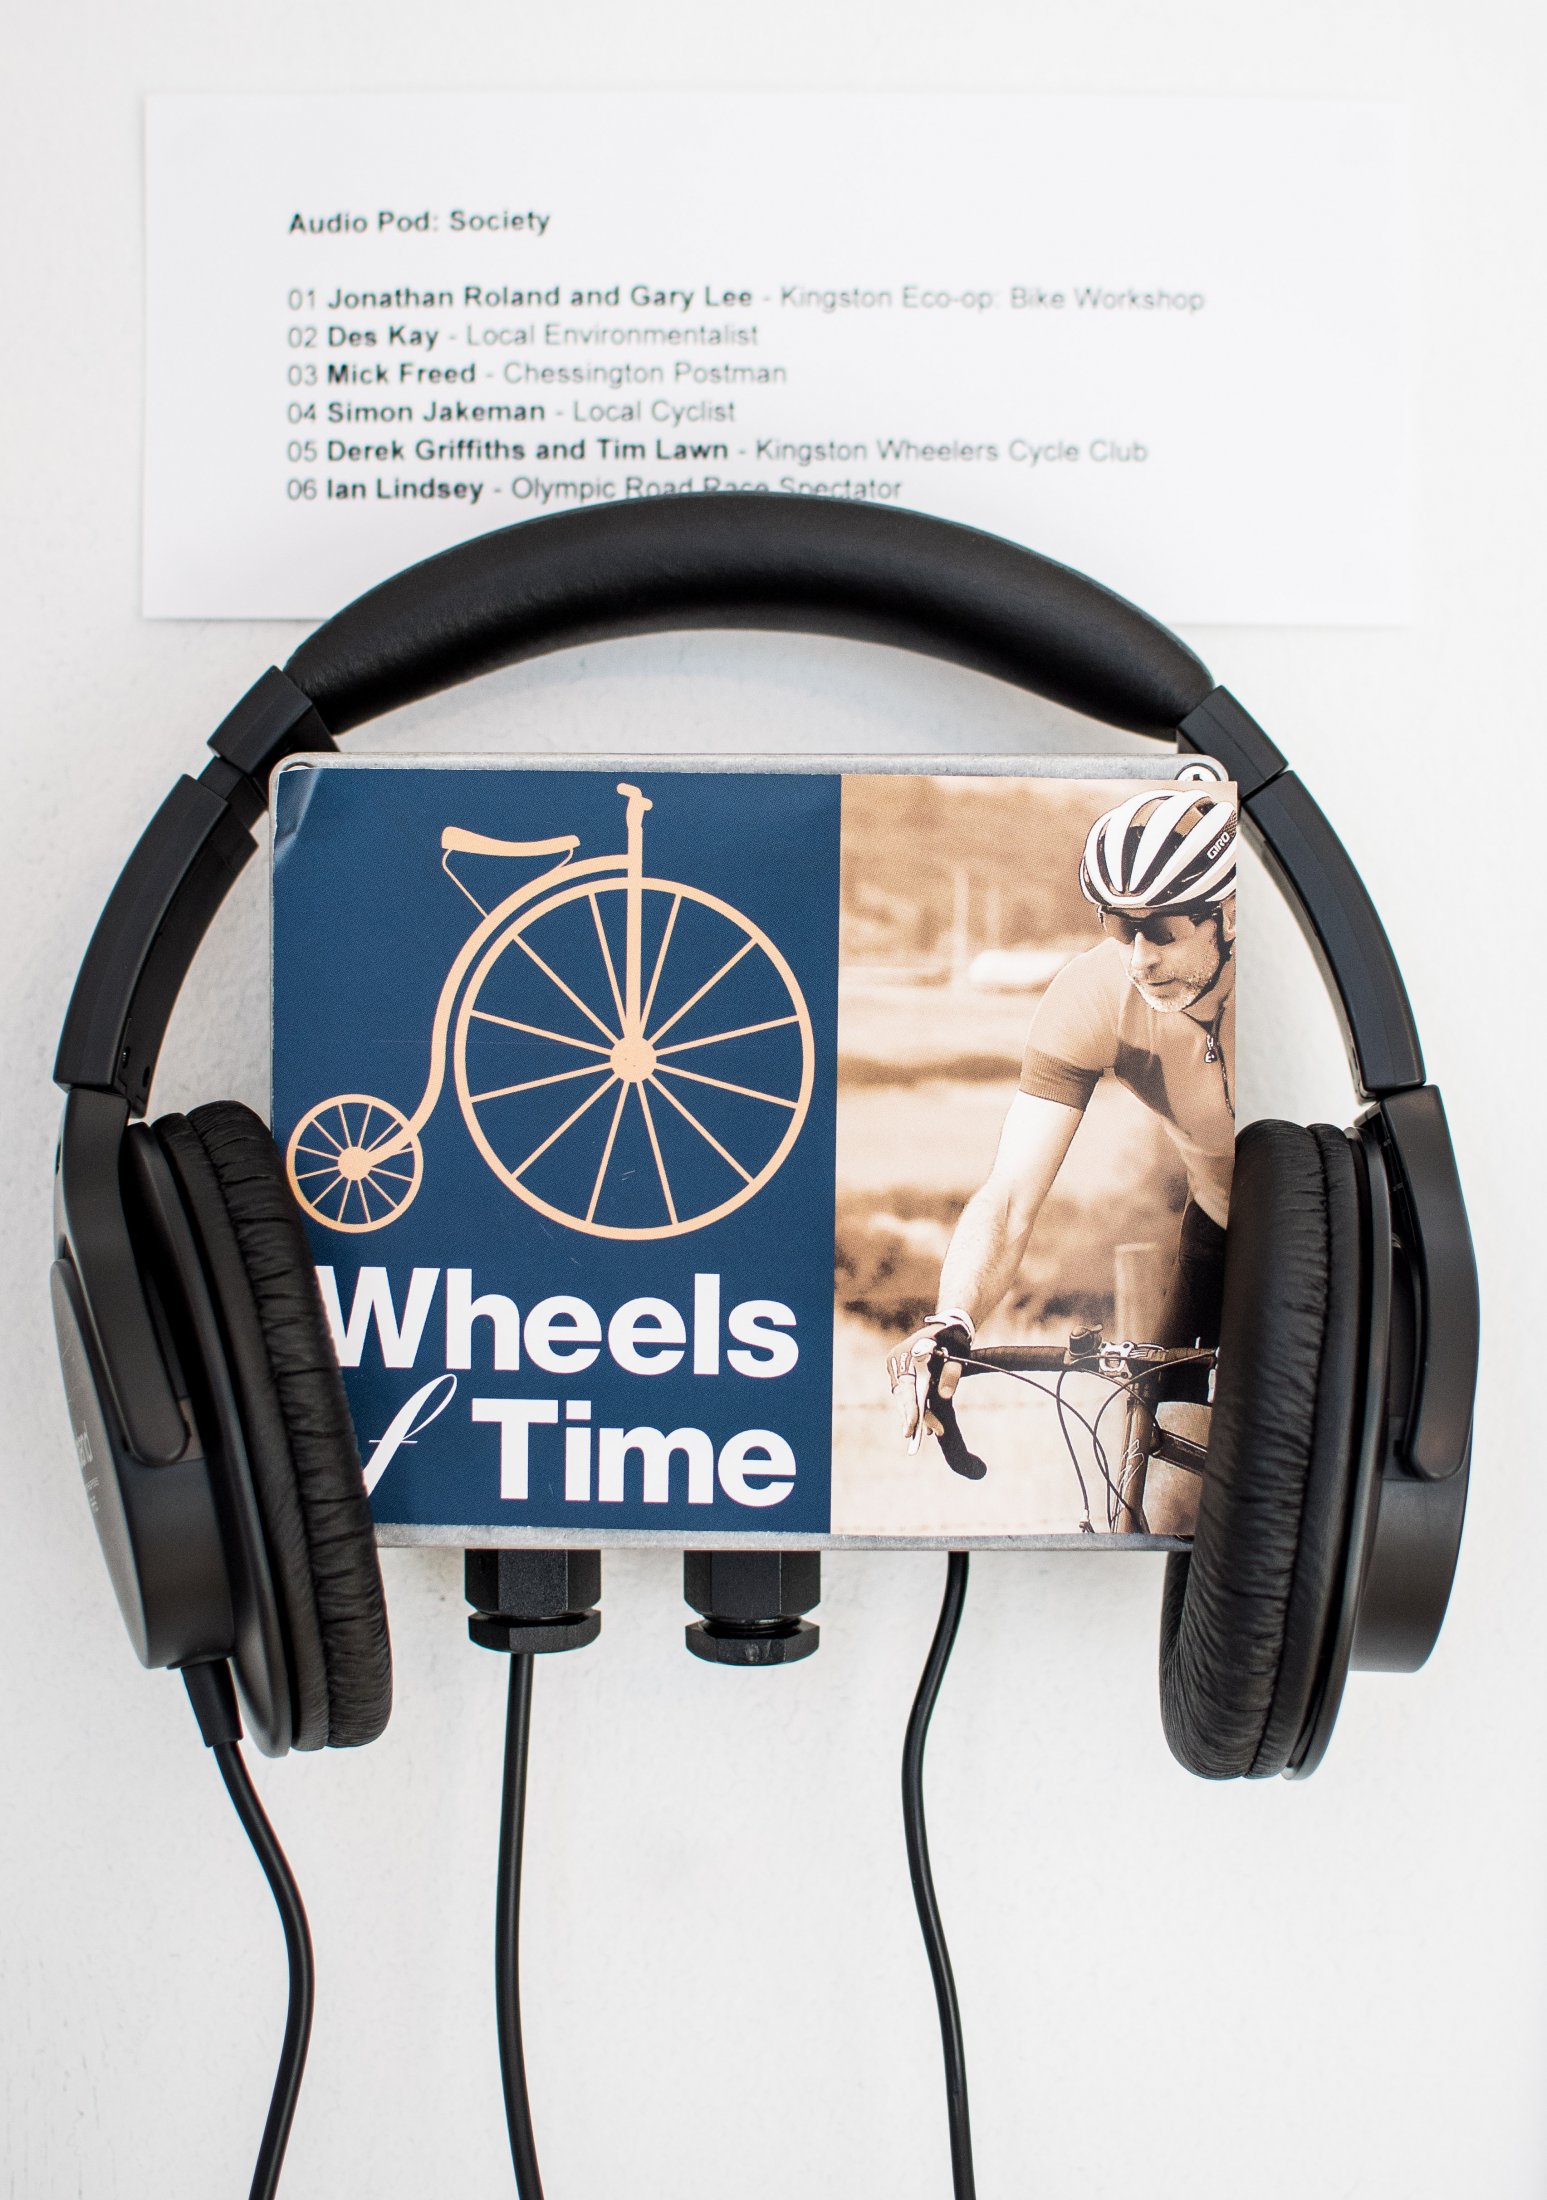 Wheels of Time Exhibition. Photo: Charlotte Levy